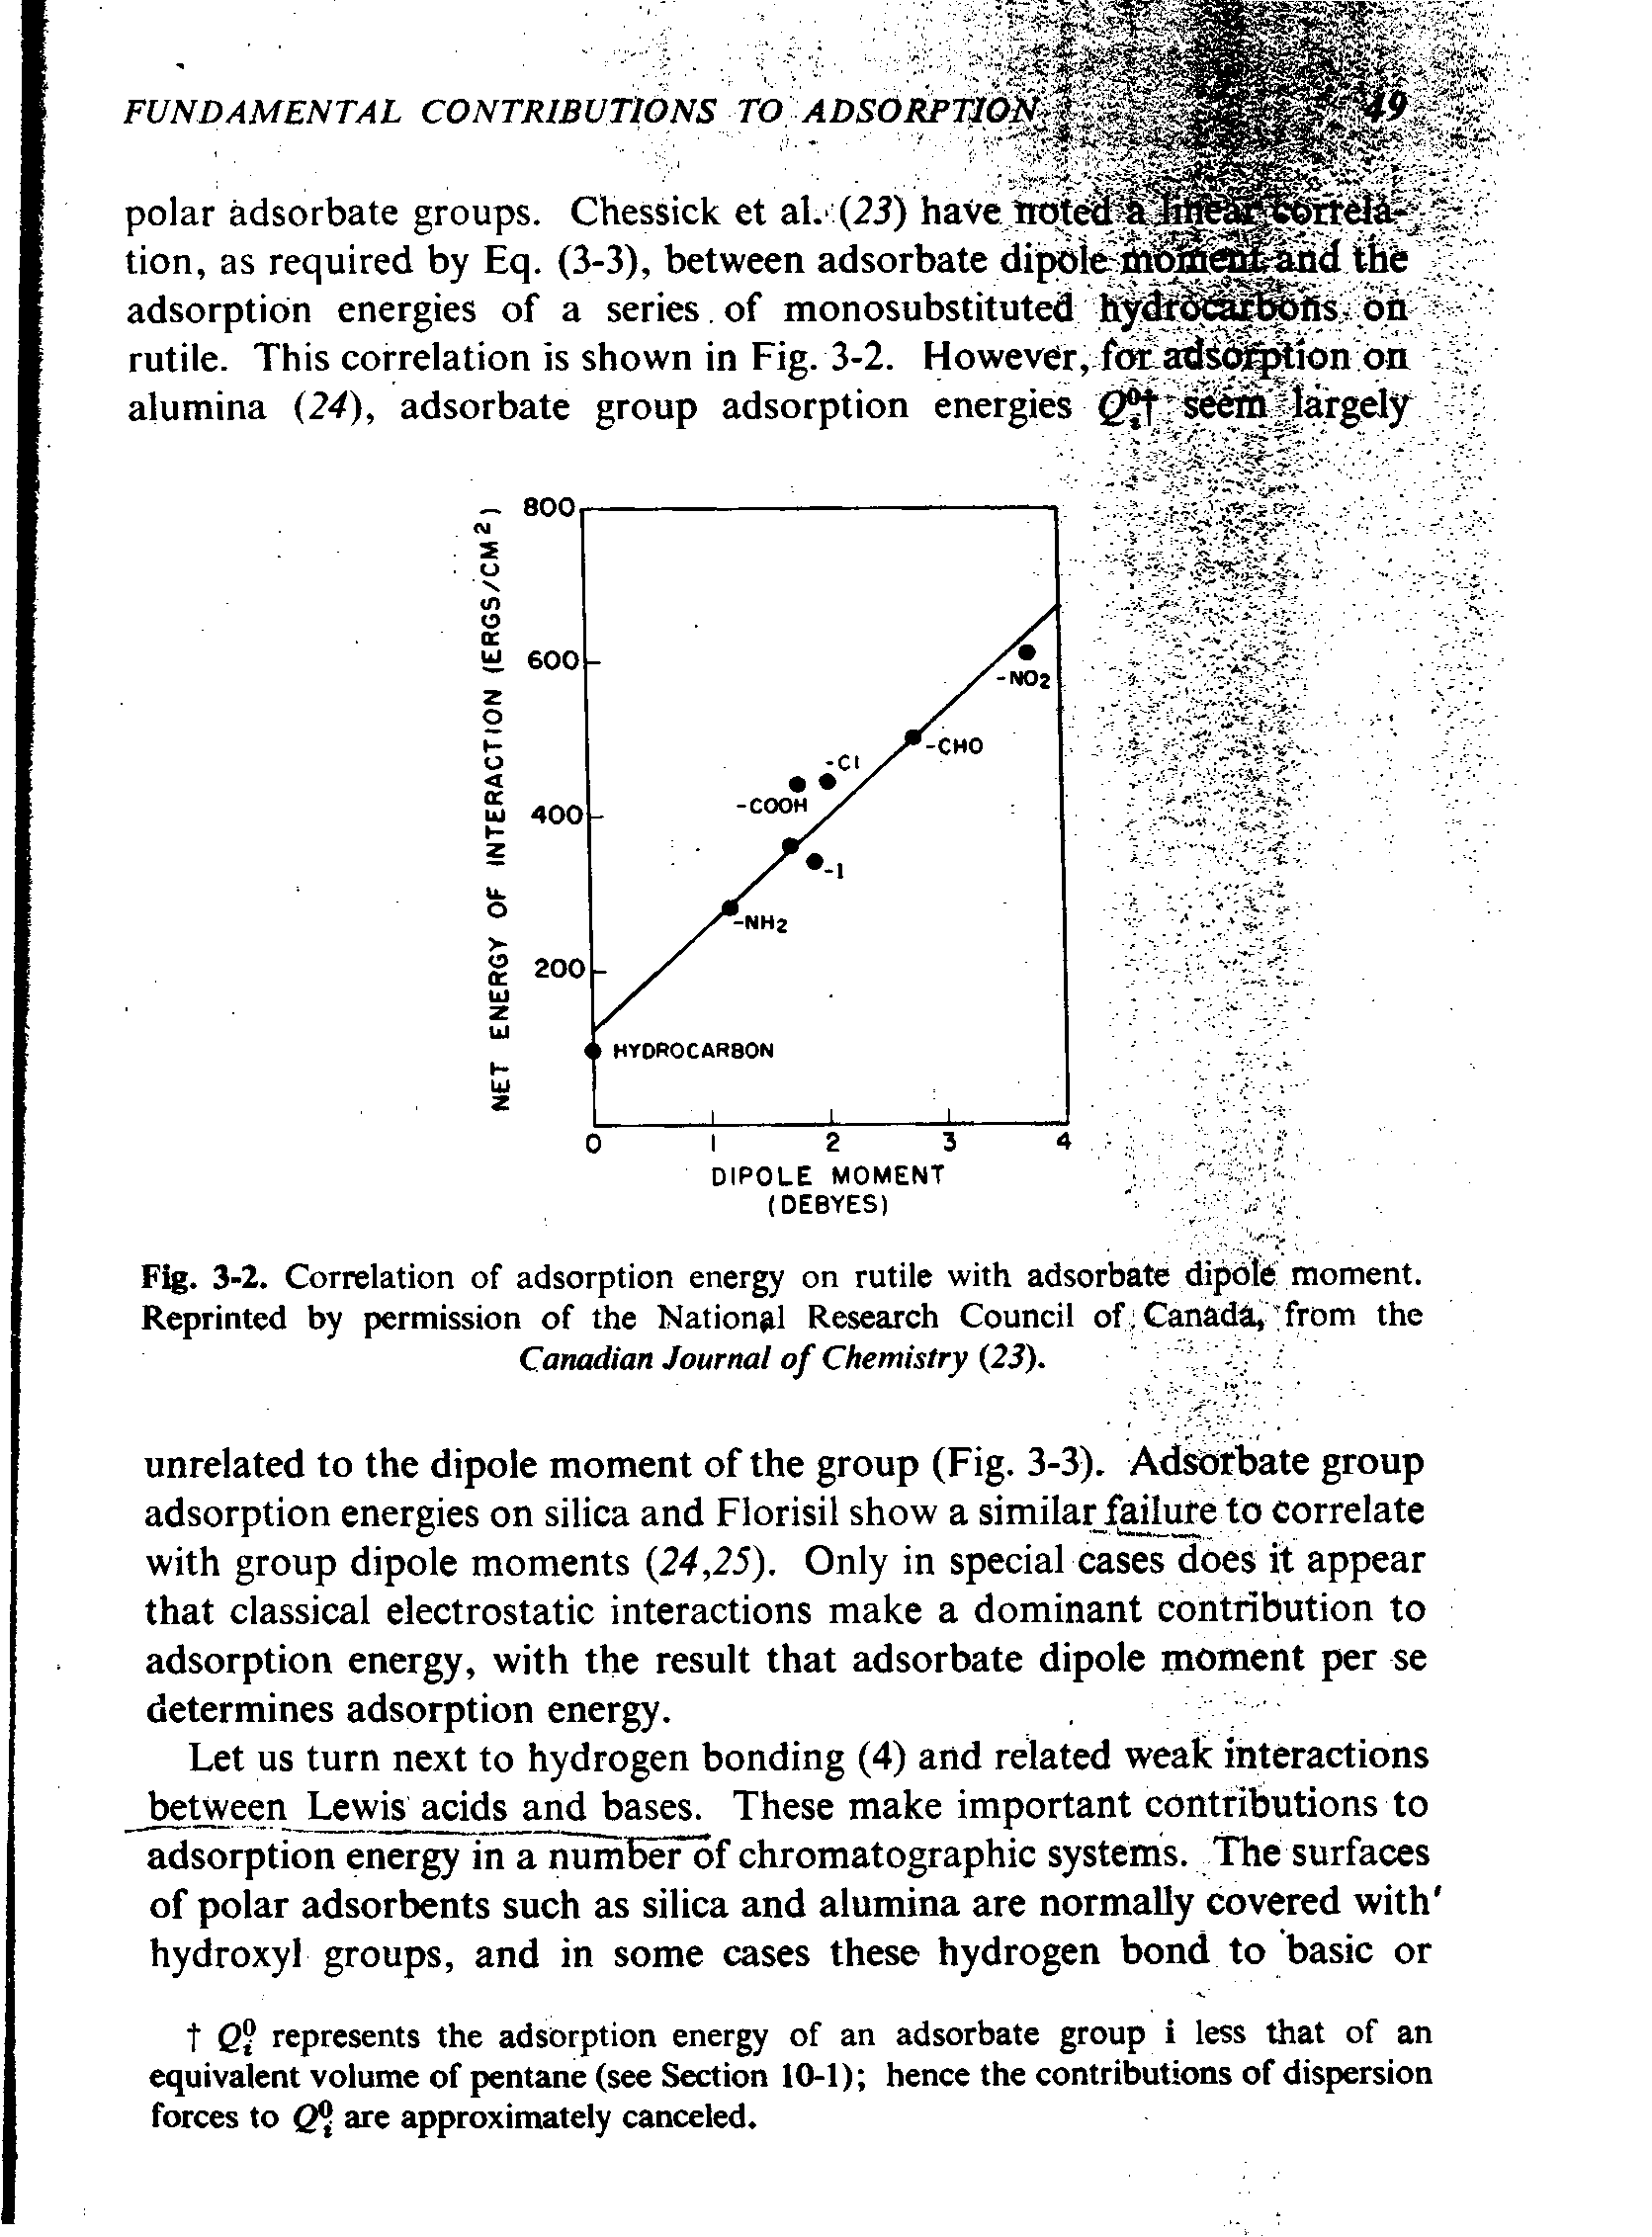 Fig. 3-2. Correlation of adsorption energy on rutile with adsorbate dipole moment. Reprinted by permission of the National Research Council of (Canada, from the Canadian Journal of Chemistry (23).